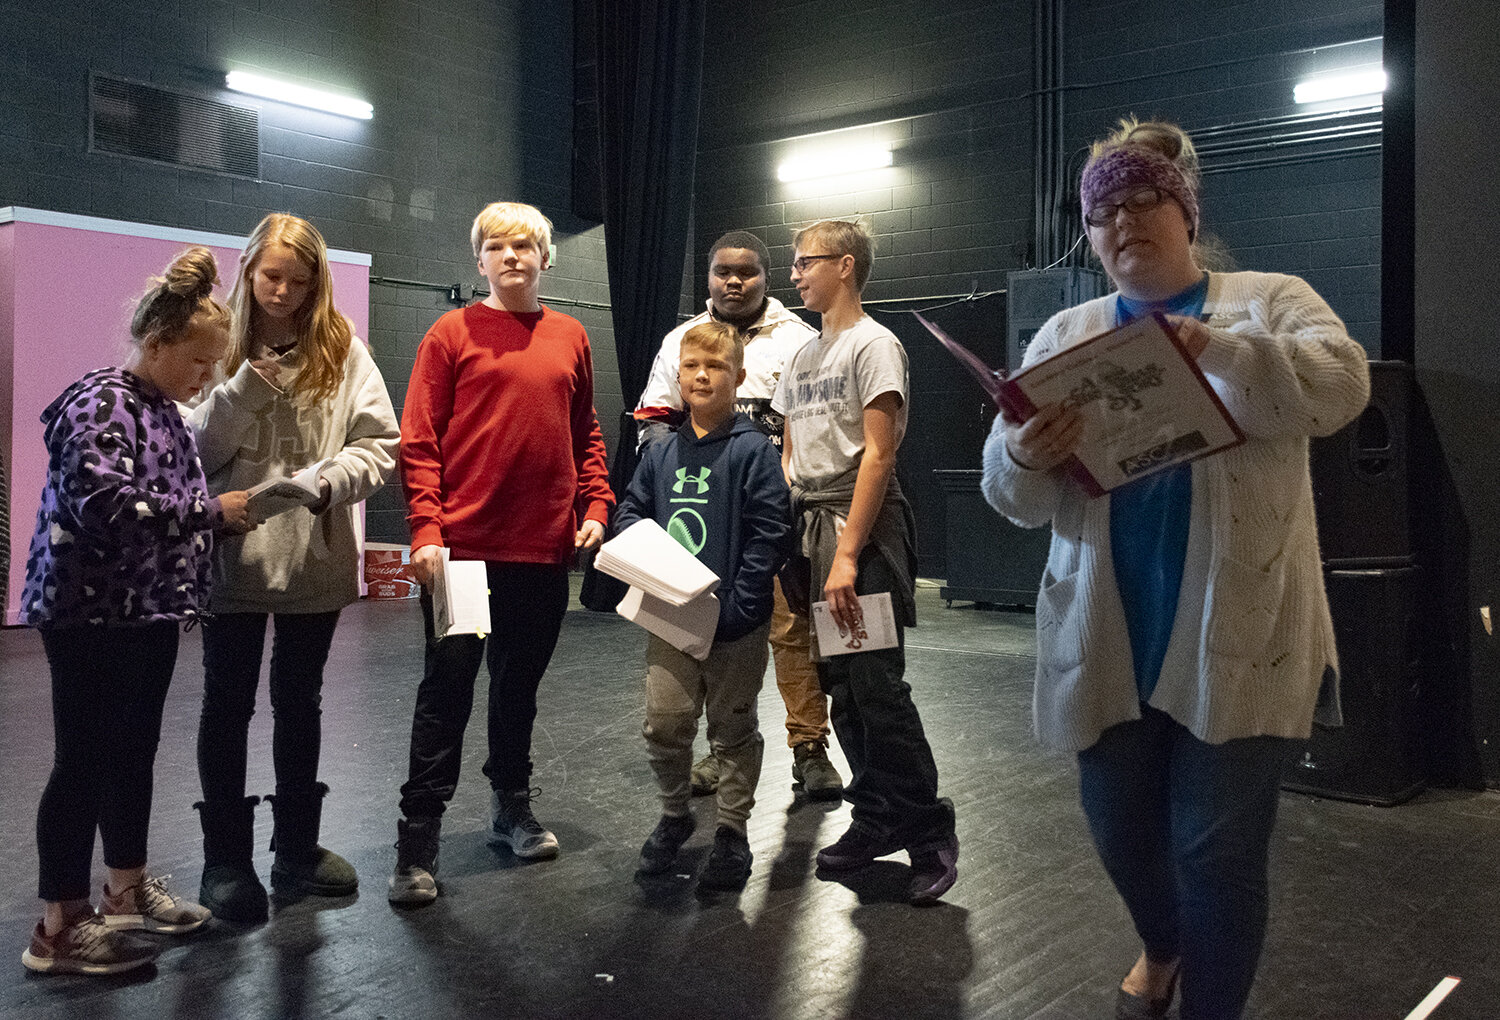  “A Christmas Story” director and ASC Theater Education Coordinator Lindsey Collins (right) leads young cast members through a scene during rehearsals.  